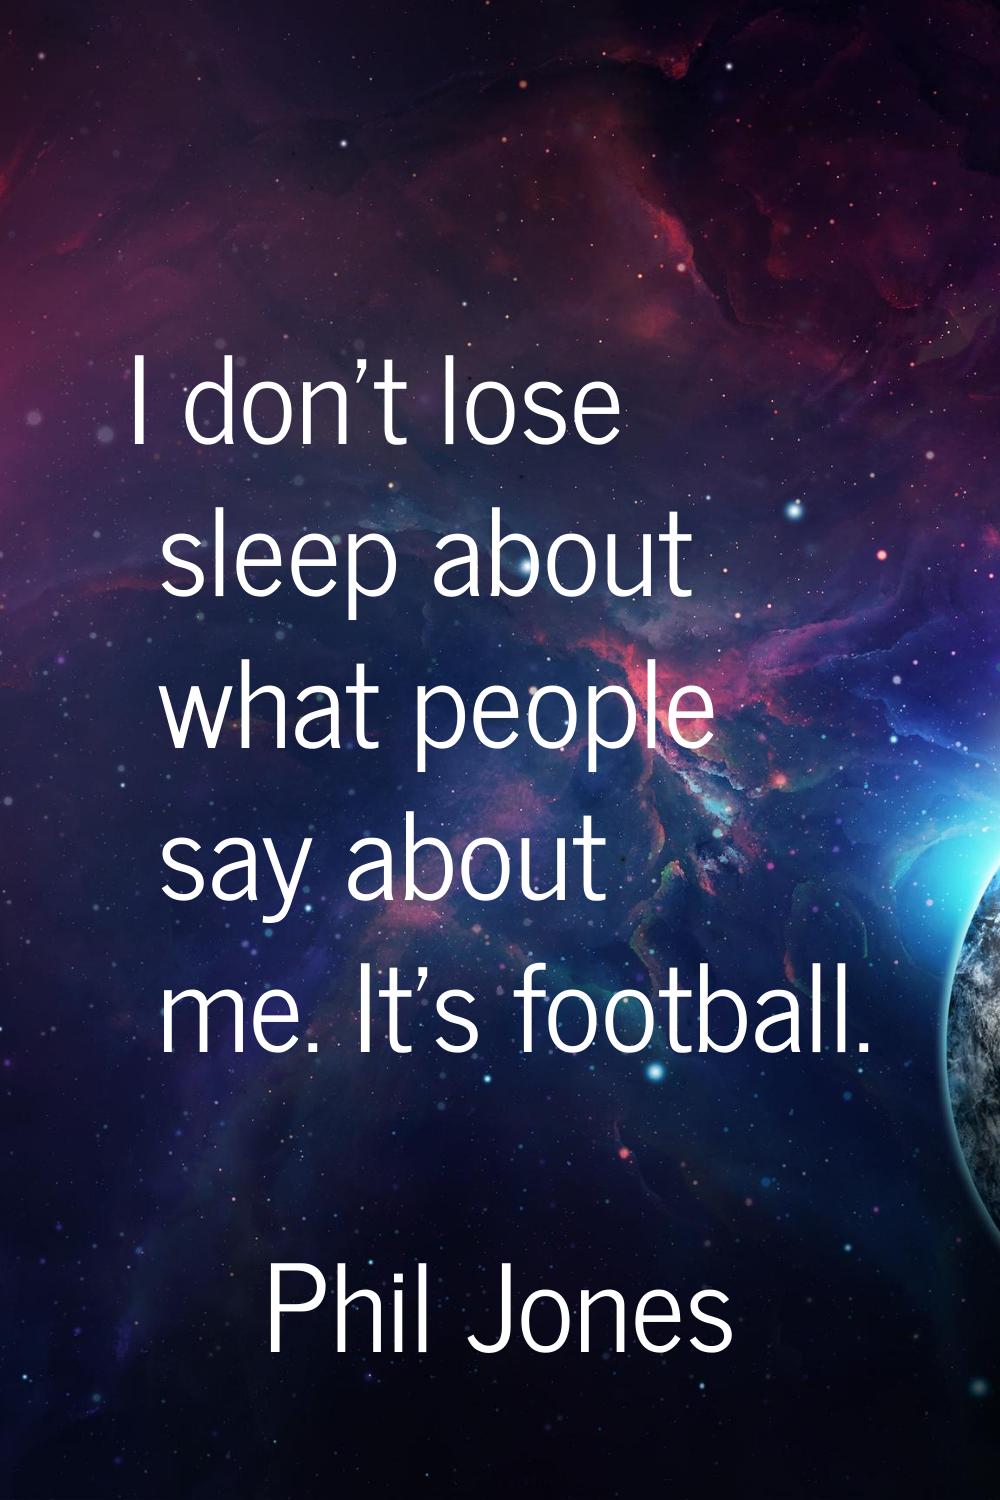 I don't lose sleep about what people say about me. It's football.